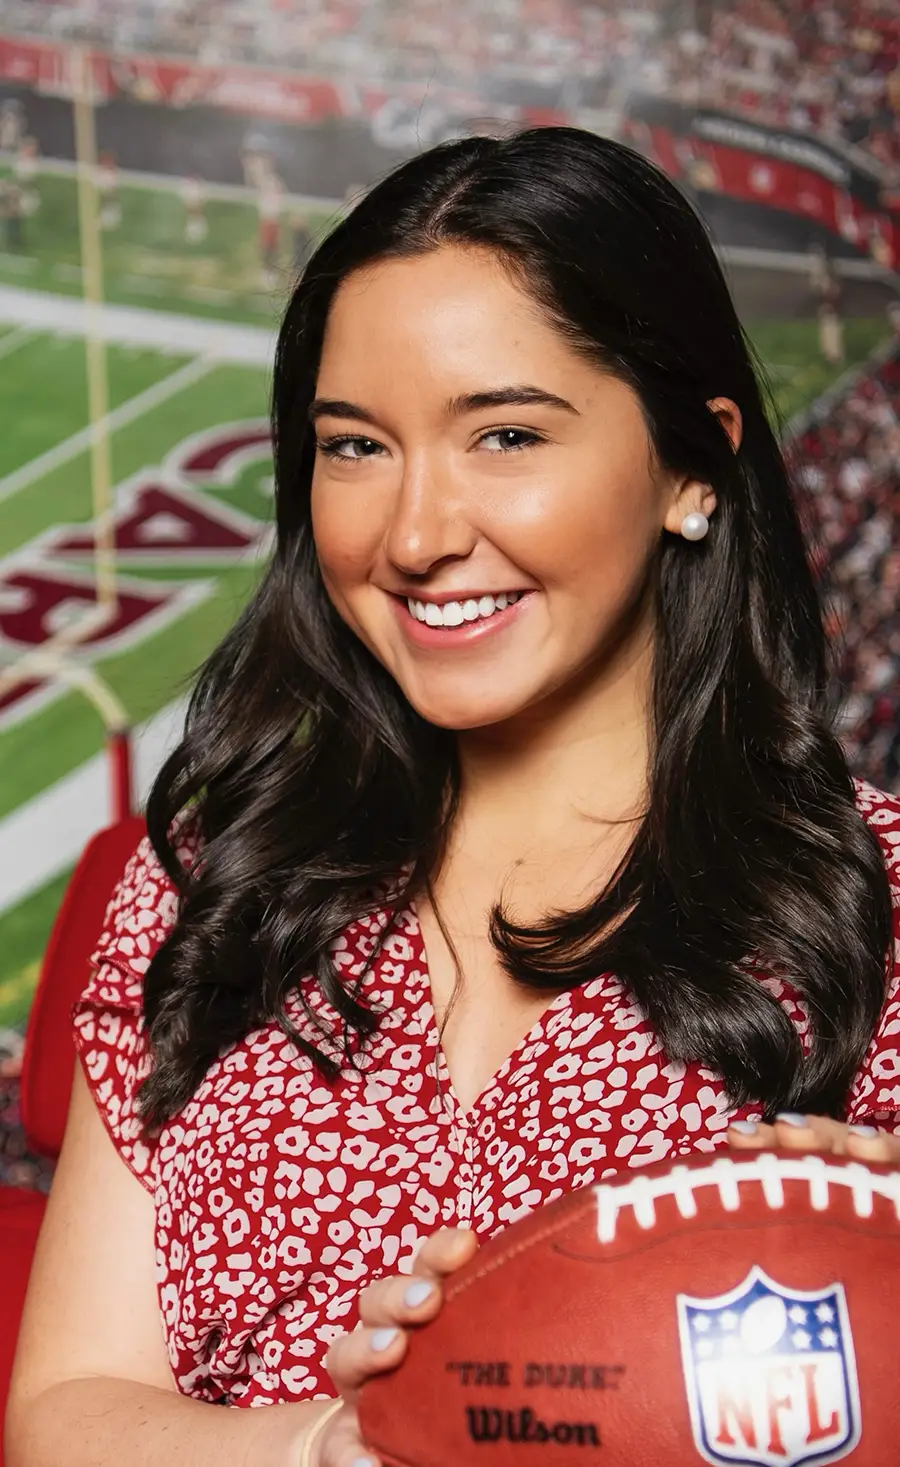 Portrait photograph headshot of Elizabeth "Libby" Vernon, BS' 22 smiling in a red blouse top that has white small custom flower shape patterns all over as she holds a National Football League shaped game-day ball (foreground) while in the background behind her is a zoomed in wall picture perspective of the Arizona Cardinals stadium field area